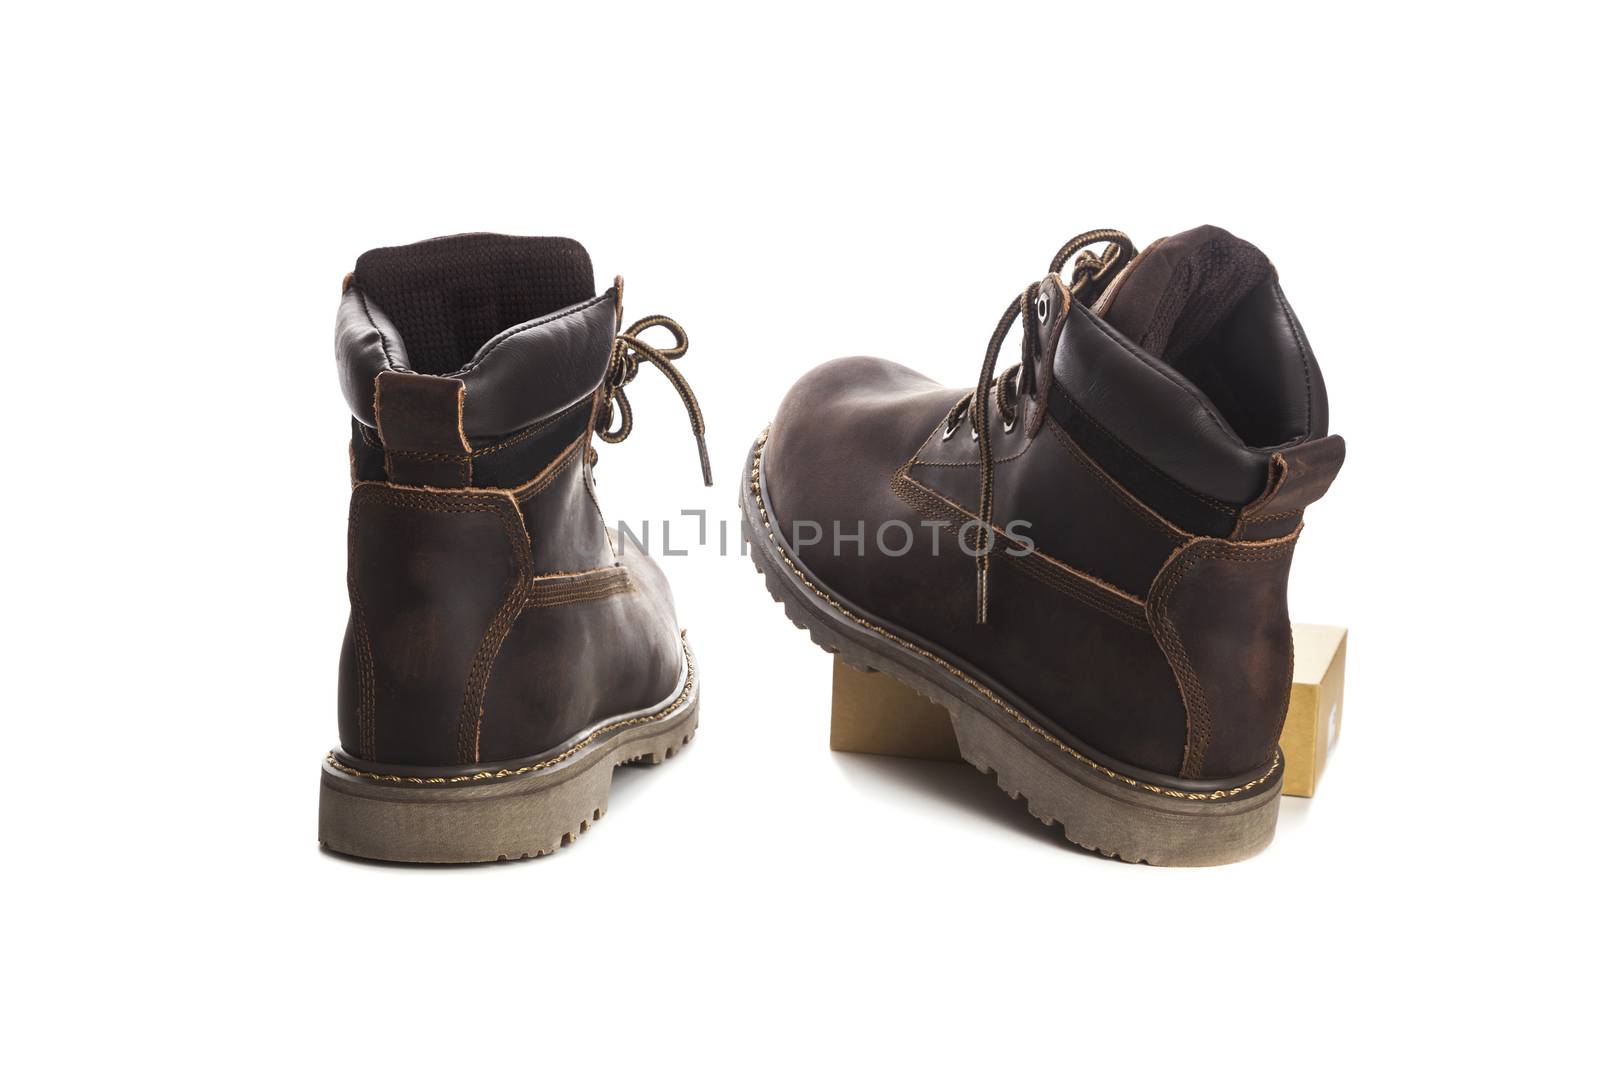 Man ankle boots, brown color, with nubuck leather. Isolated on white background, closed up